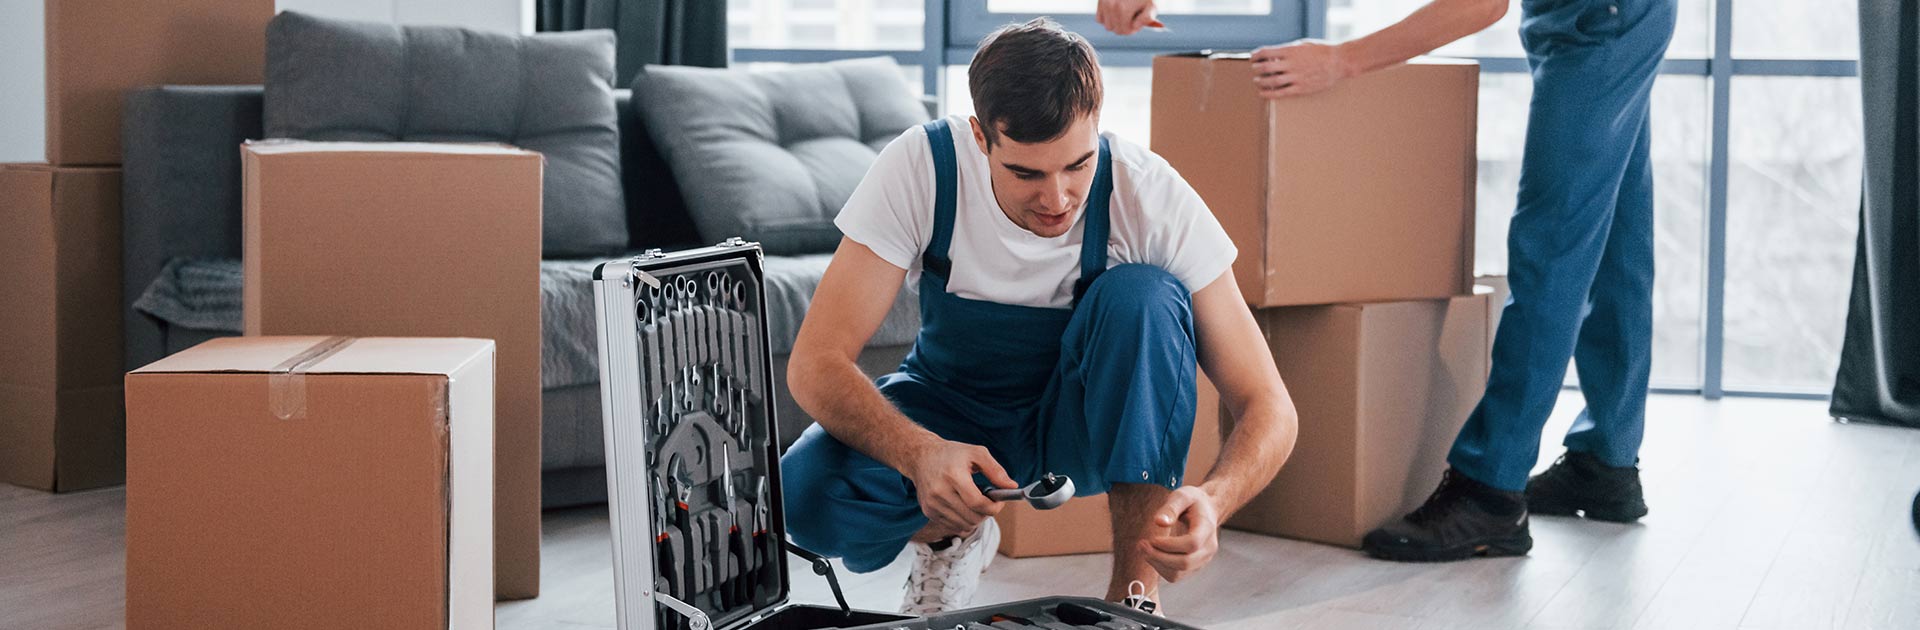 Best Movers and Packers in The Meadows Dubai